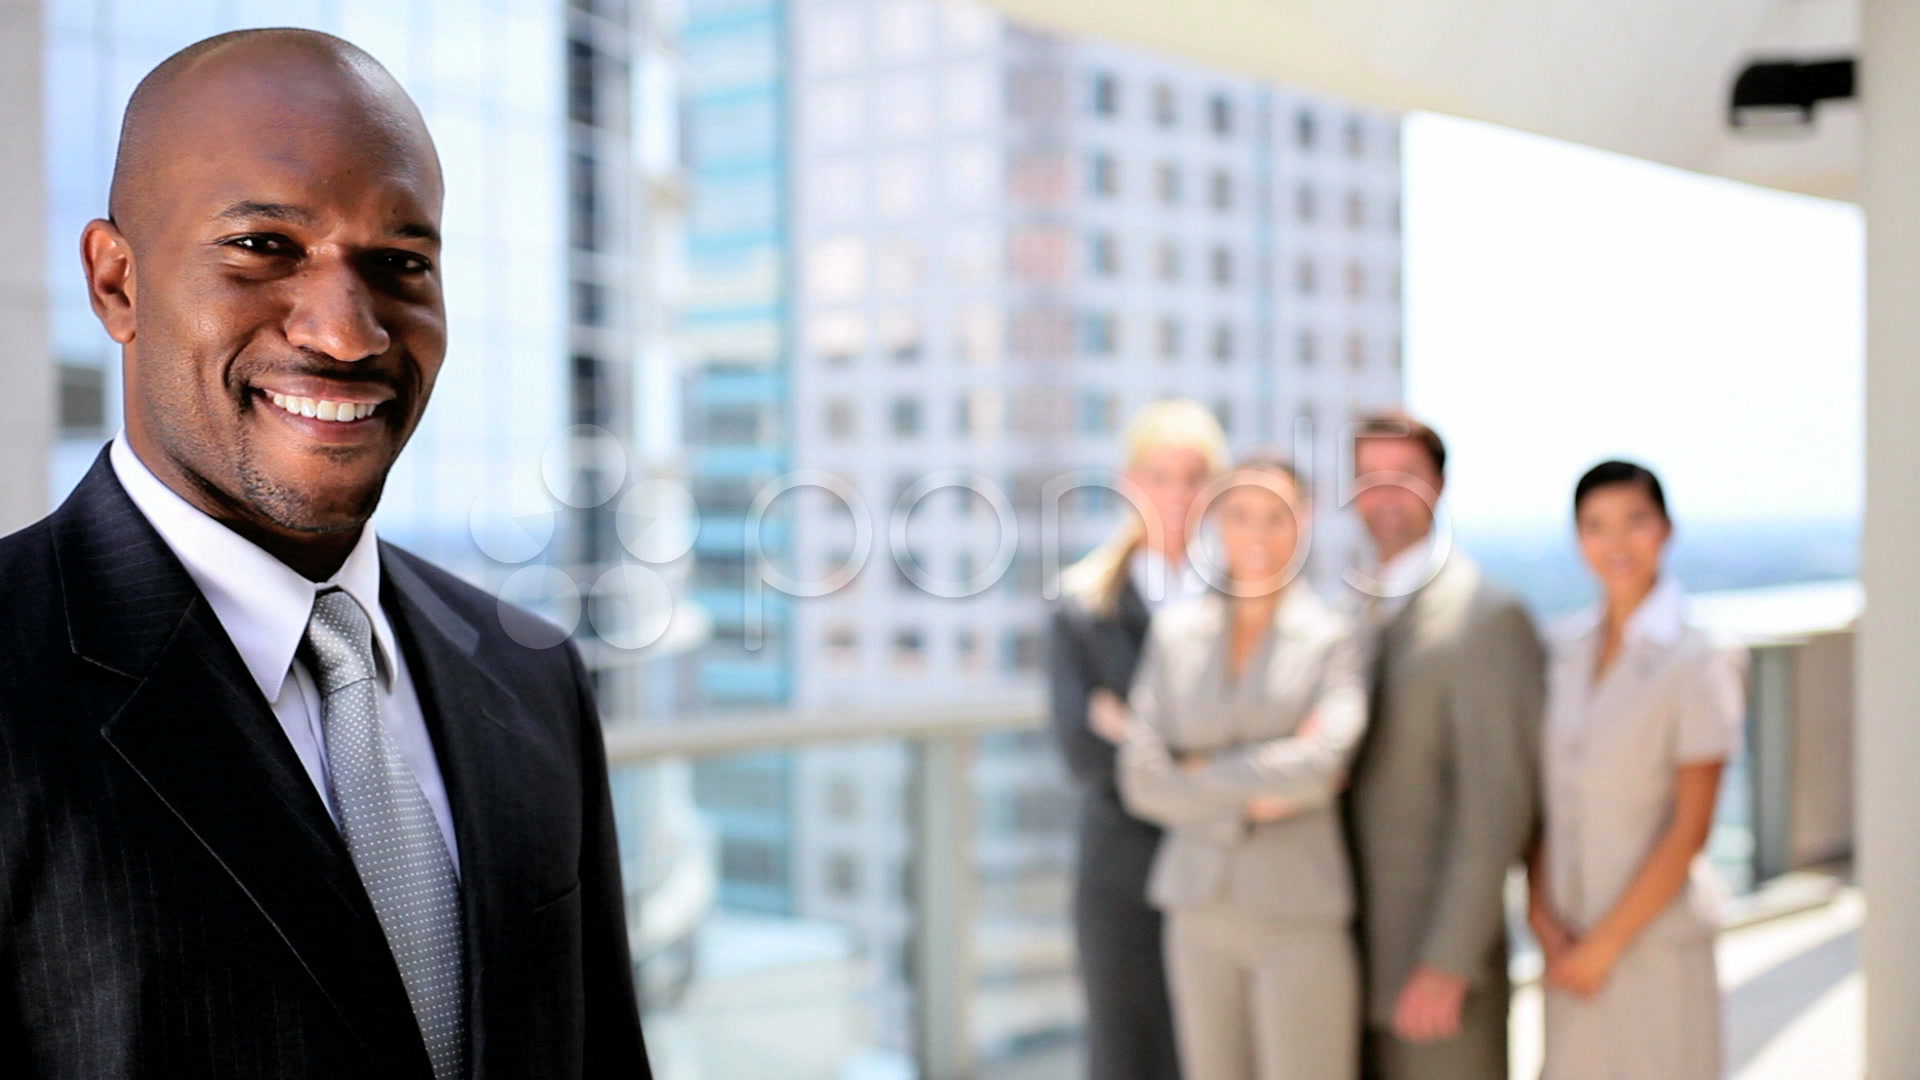 Video: Portrait of African American Businessman with Colleagues ...